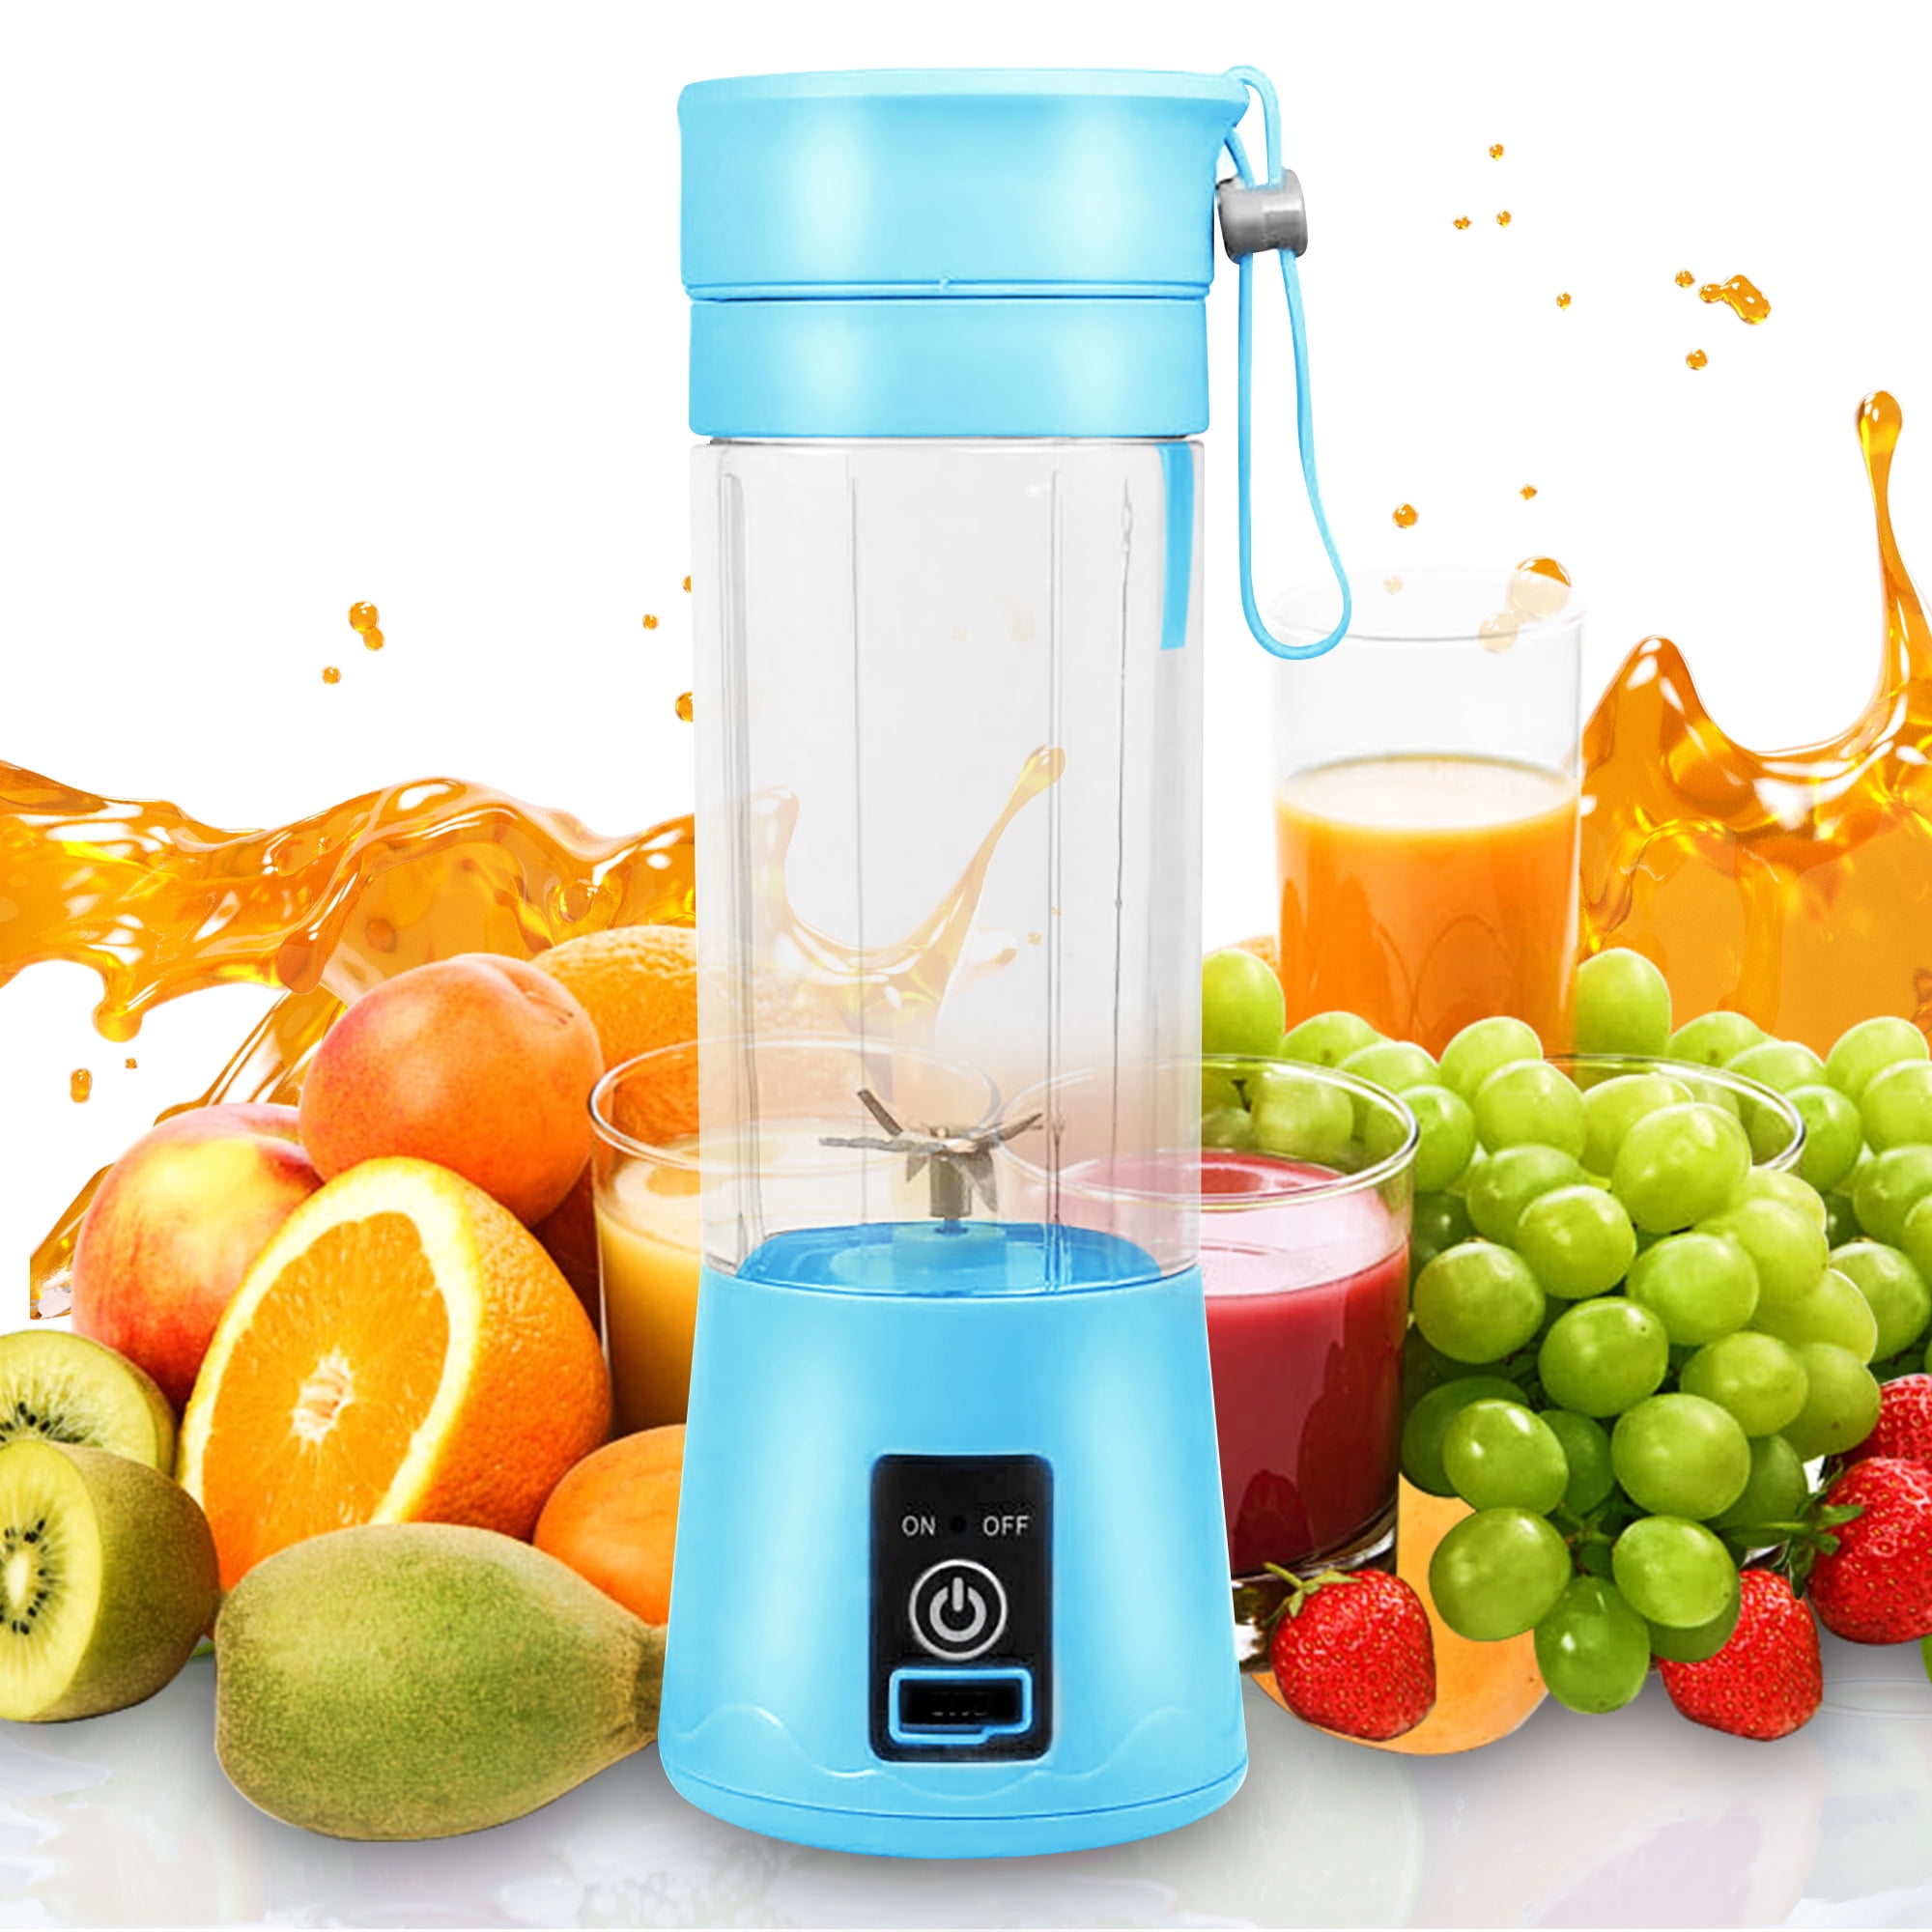 Portable Multi Function Ice Block Blender 2d For Smoothie Making, Hand Crank,  And Kitchen Use From Loganelise, $36.56